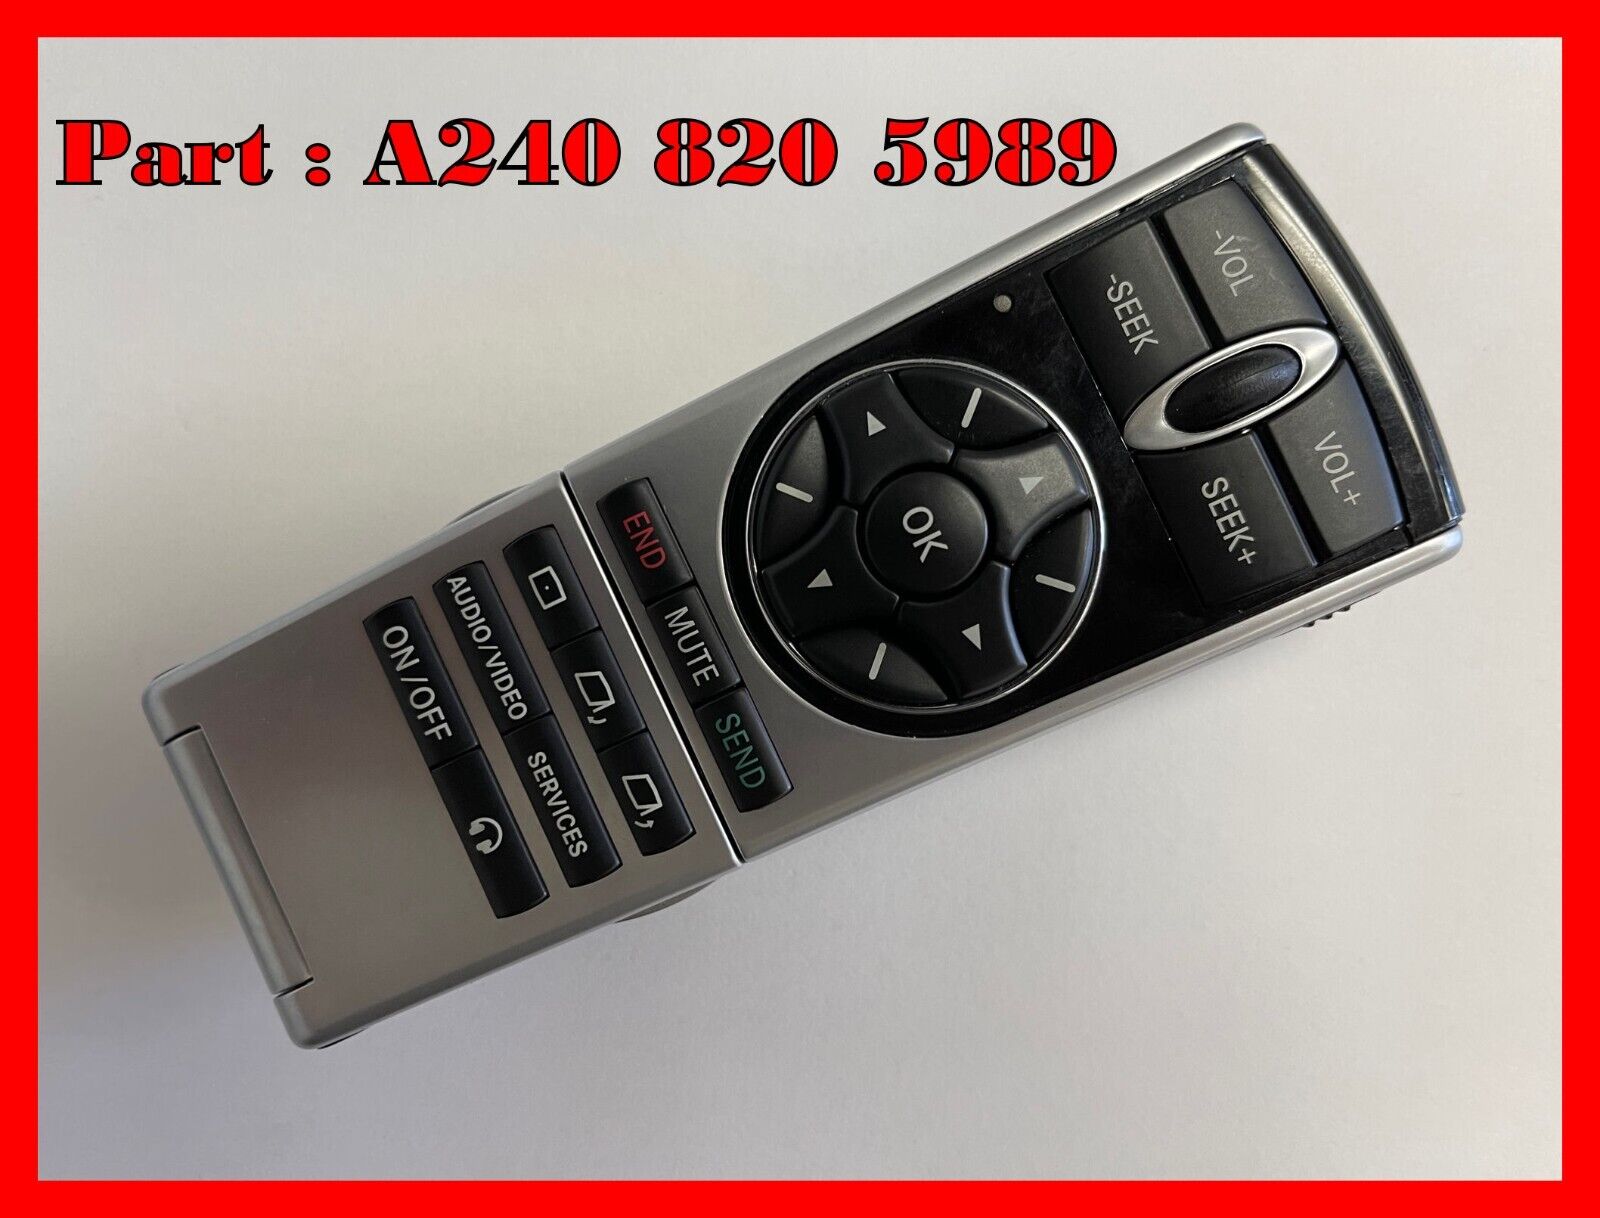 2004-2012 MAYBACH 57 62 MODELS REAR ENTERTAINMENT REMOTE A 240 820 59 89 OEM